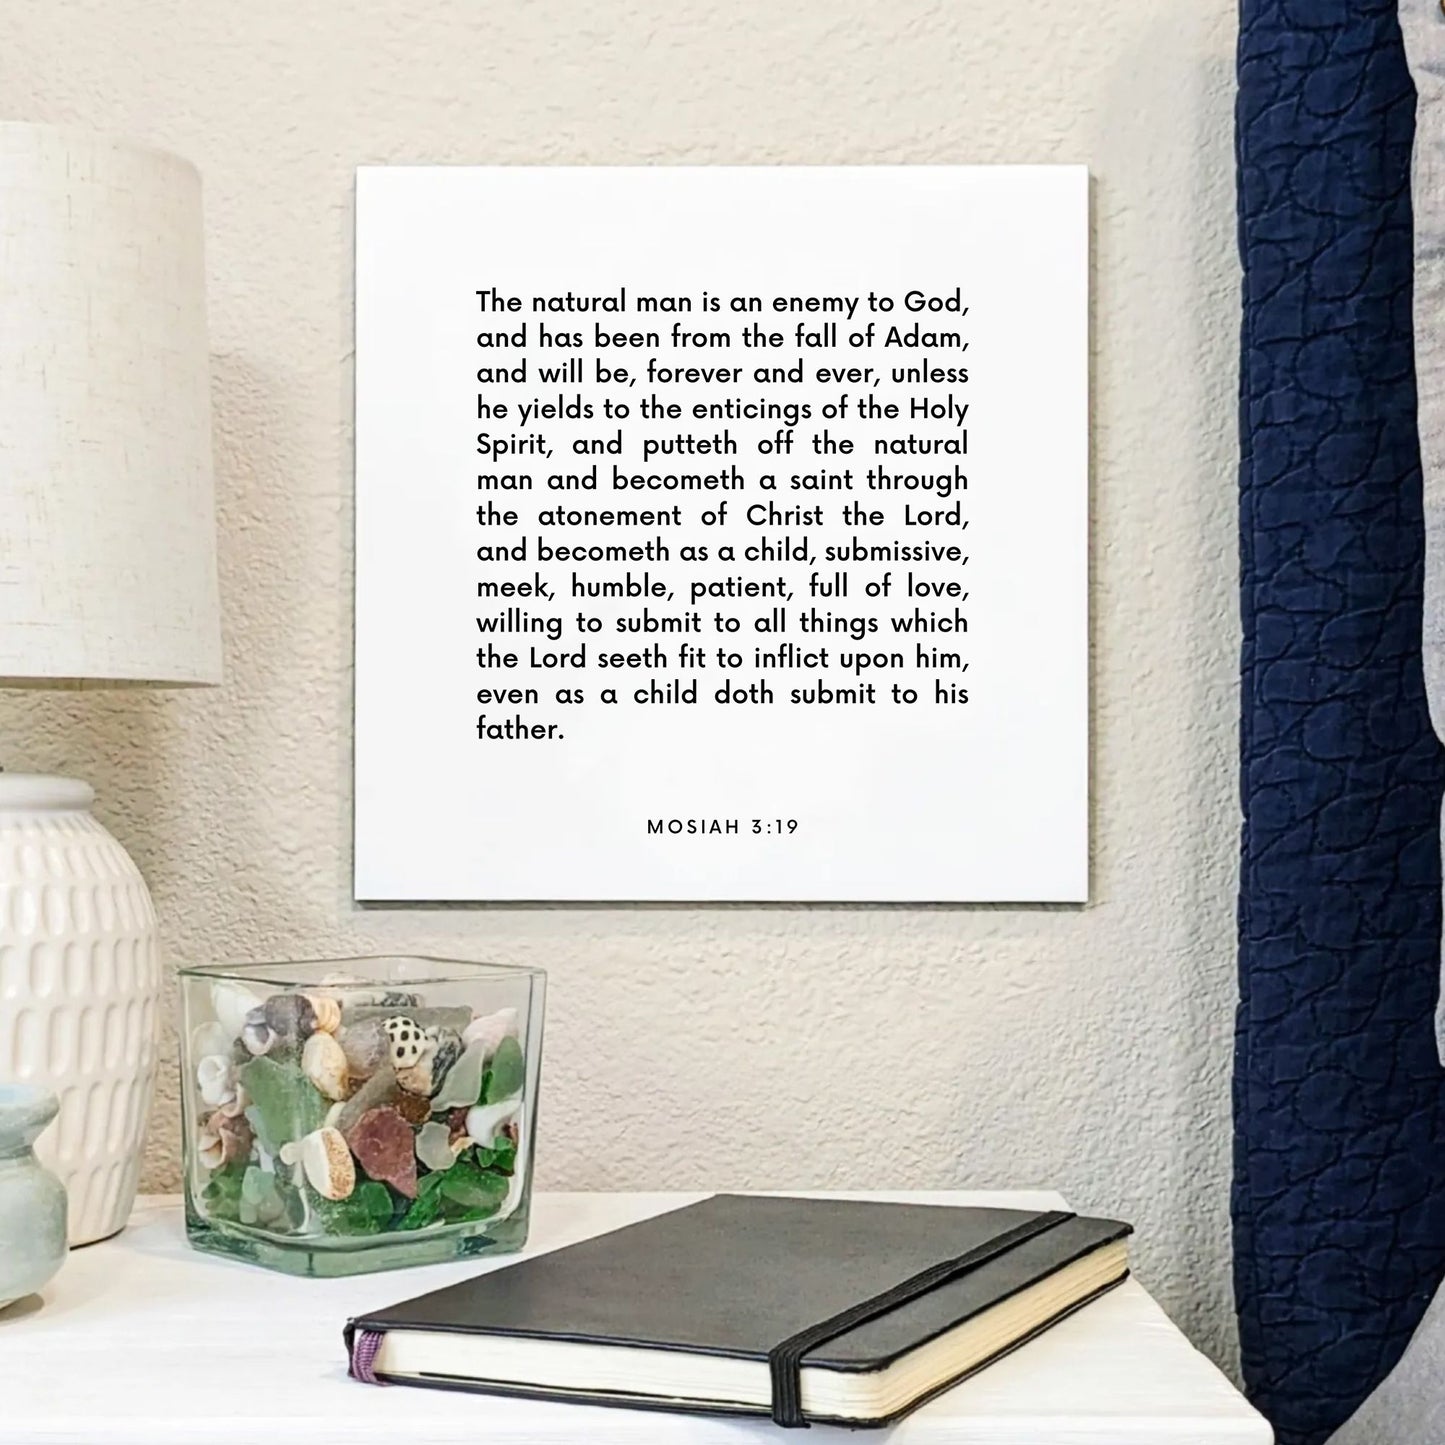 Bedside mouting of the scripture tile for Mosiah 3:19 - "The natural man is an enemy to God"